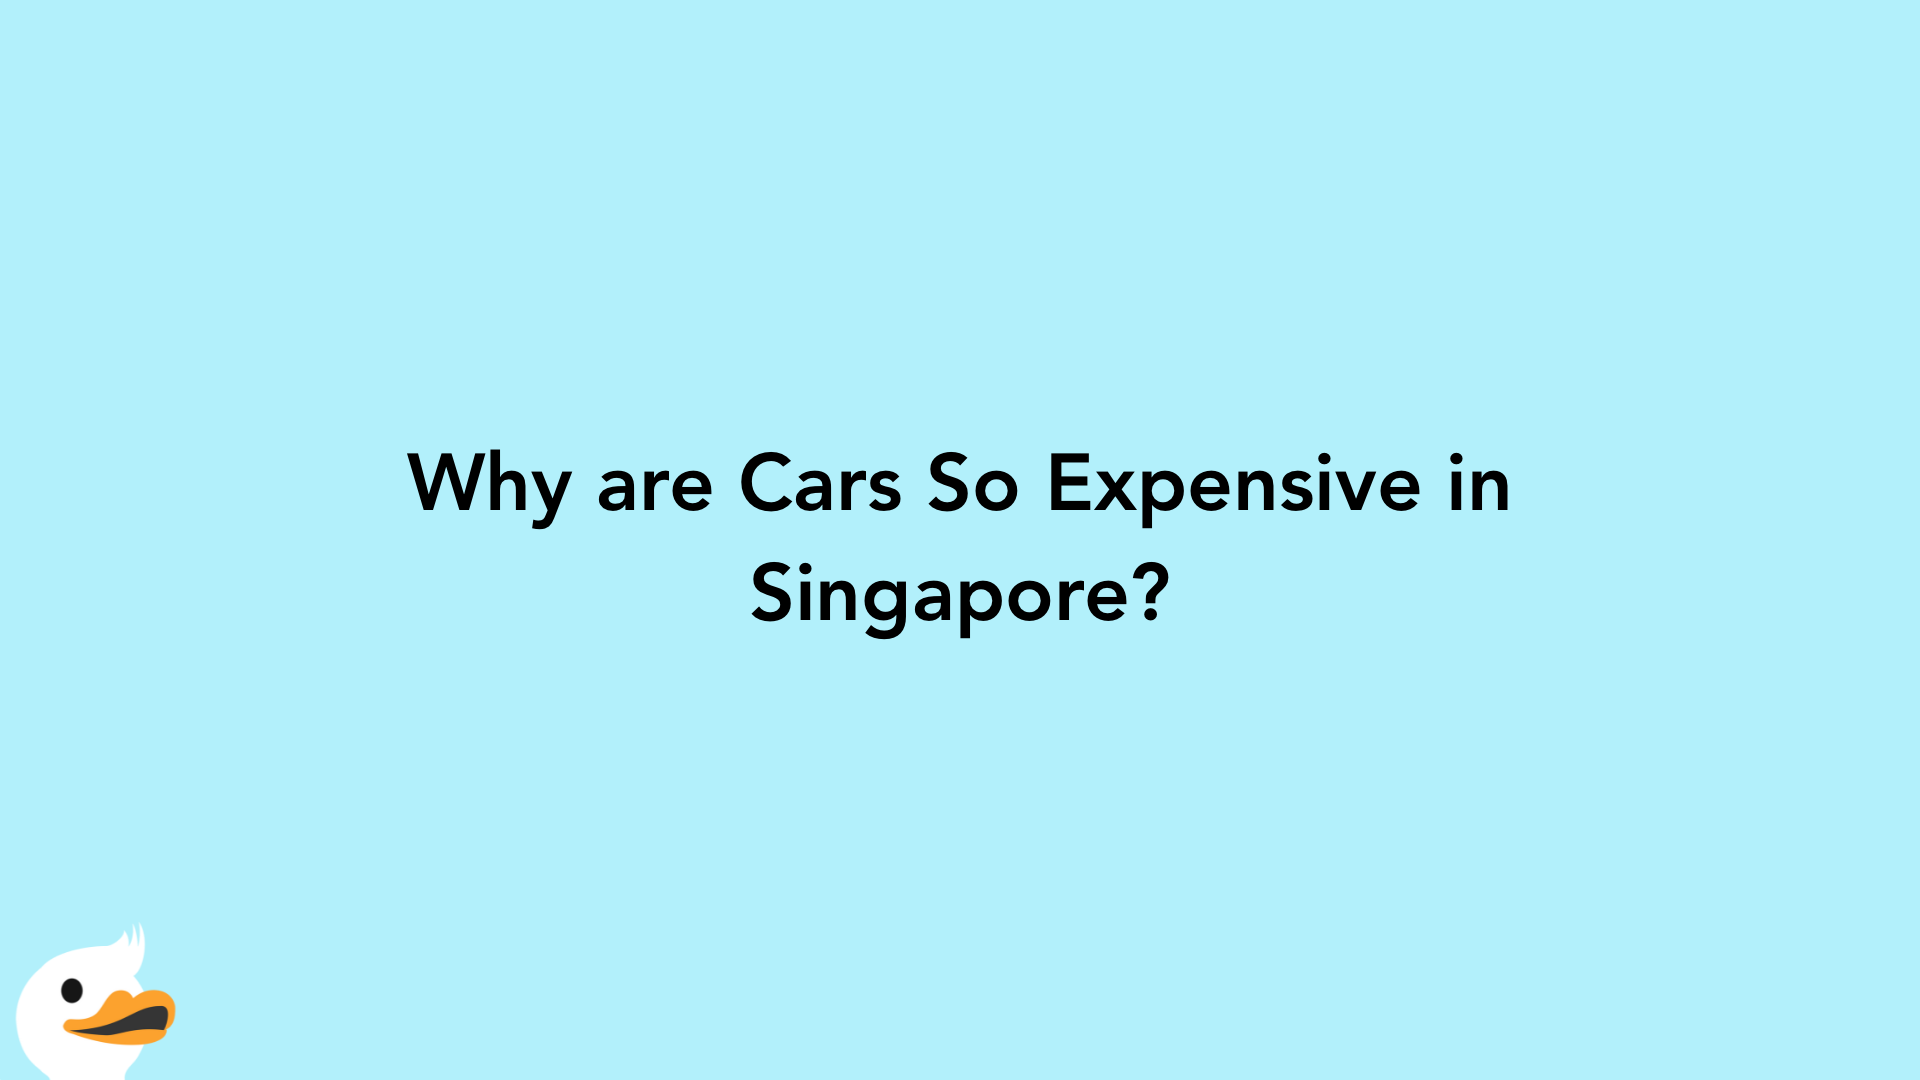 Why are Cars So Expensive in Singapore?